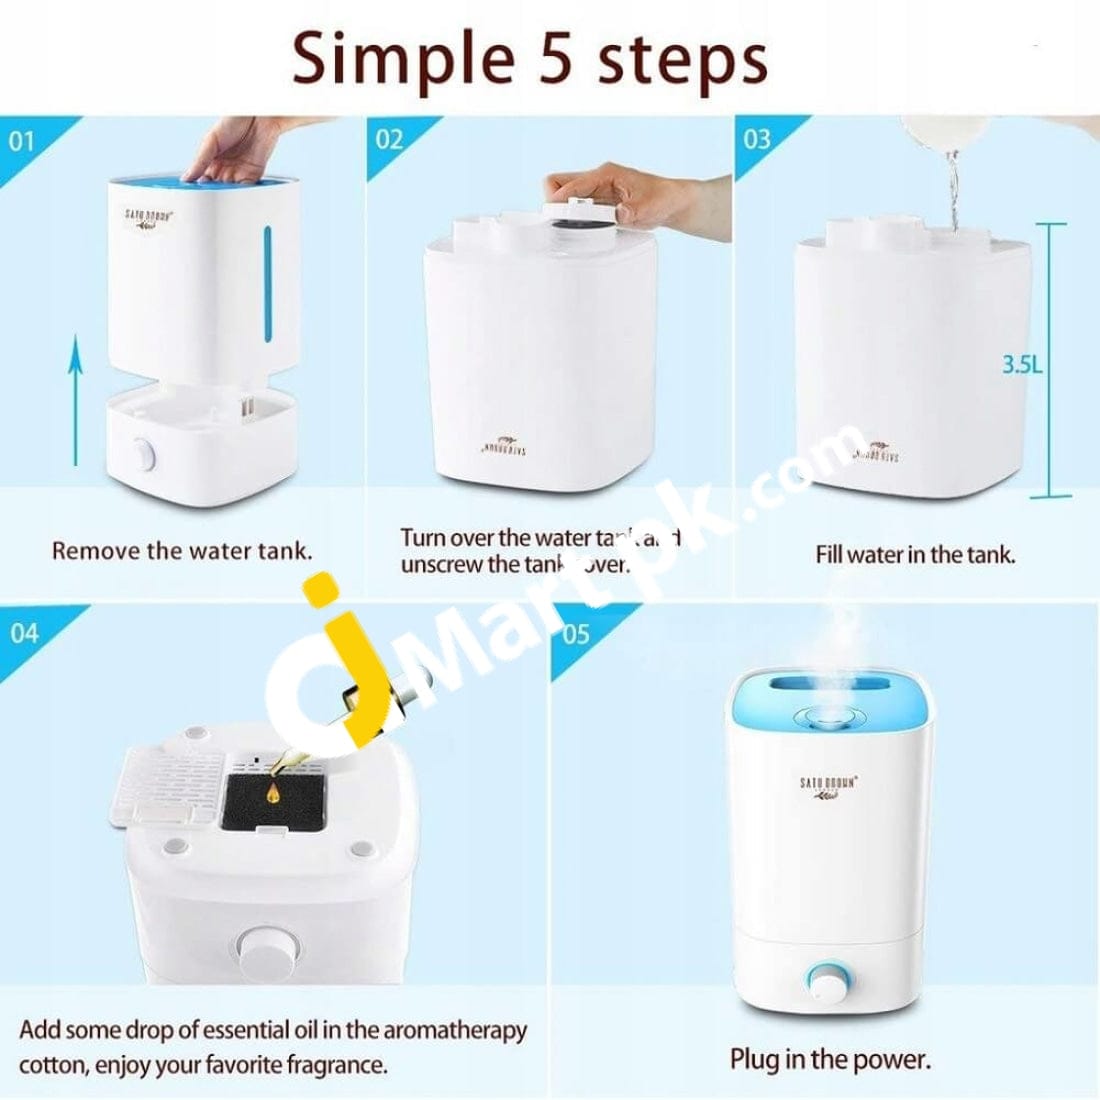 Satu Brown Ultrasonic Cool Mist Aroma Humidifier 3.5L Whisper-Quiet Aromatherapy Essential Oil